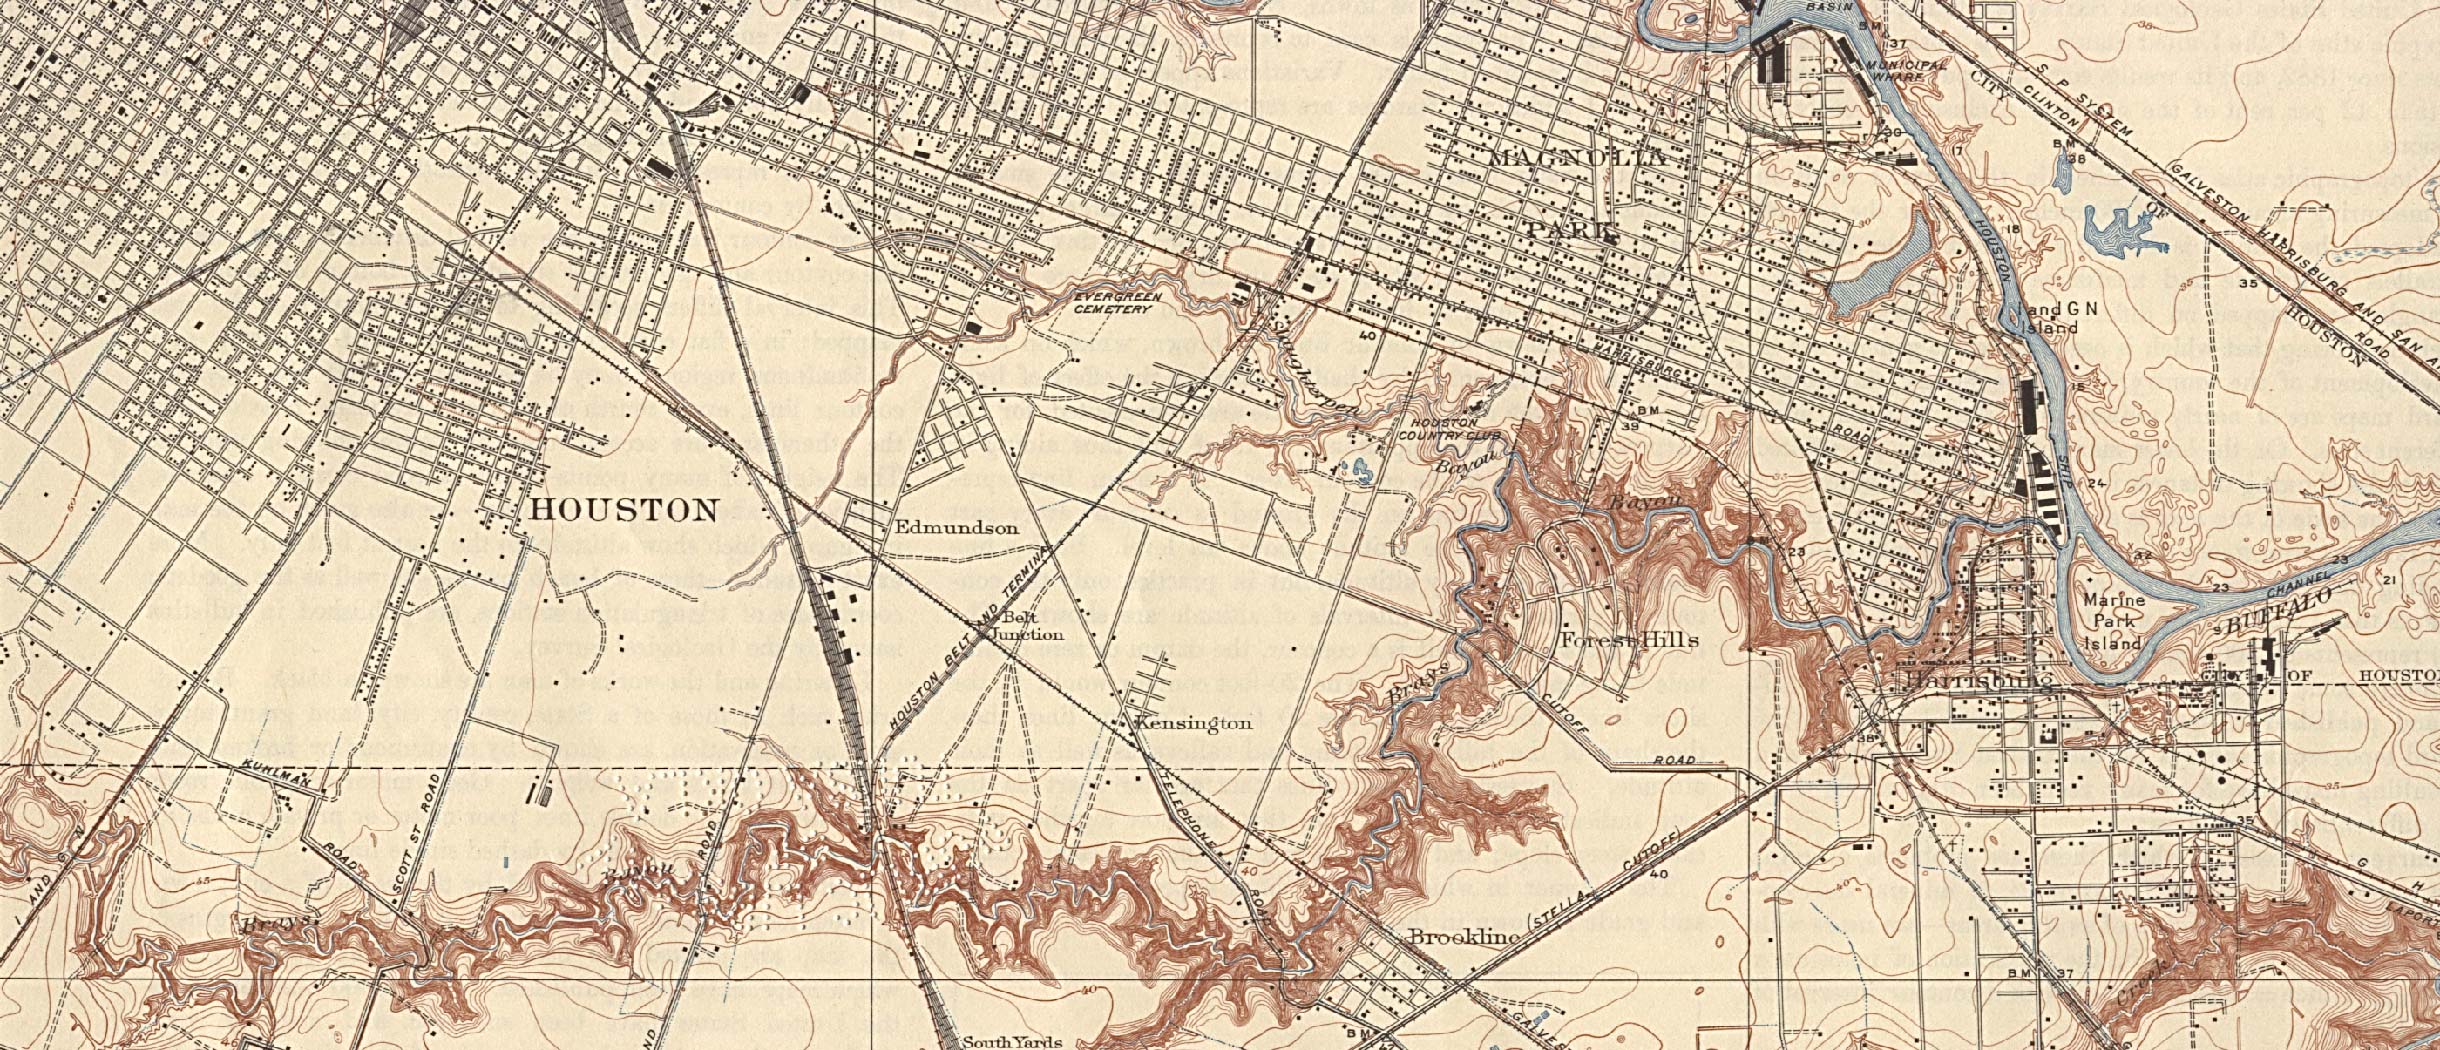 Historical Maps of Texas Cities. Houston - South East 1932 [Topographic Map] Original Scale 1:31,680 1922; Reprint, 1932. (780K) 